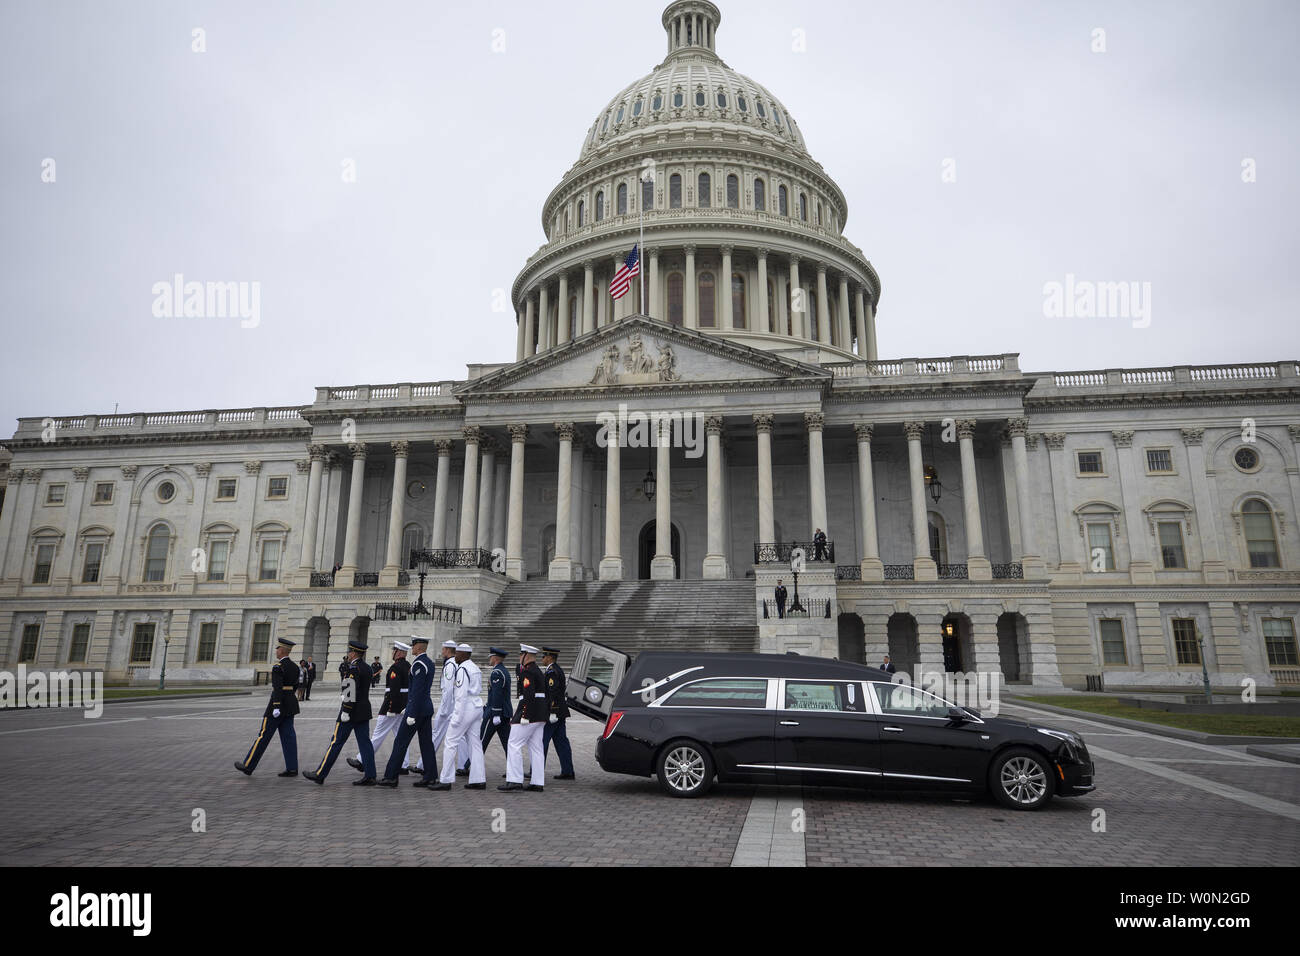 Joint service members of a military casket team carry the casket of Senator John McCain from the US Capitol to a motorcade that will ferry him to a funeral service at the National Cathedral in Washington, DC, on September 1, 2018. McCain died August 25, 2018 from brain cancer at his ranch in Sedona, Arizona, USA. He was a veteran of the Vietnam War, served two terms in the US House of Representatives, and was elected to five terms in the US Senate. McCain also ran for president twice, and was the Republican nominee in 2008.   Photo by Jim Lo Scalzo Stock Photo